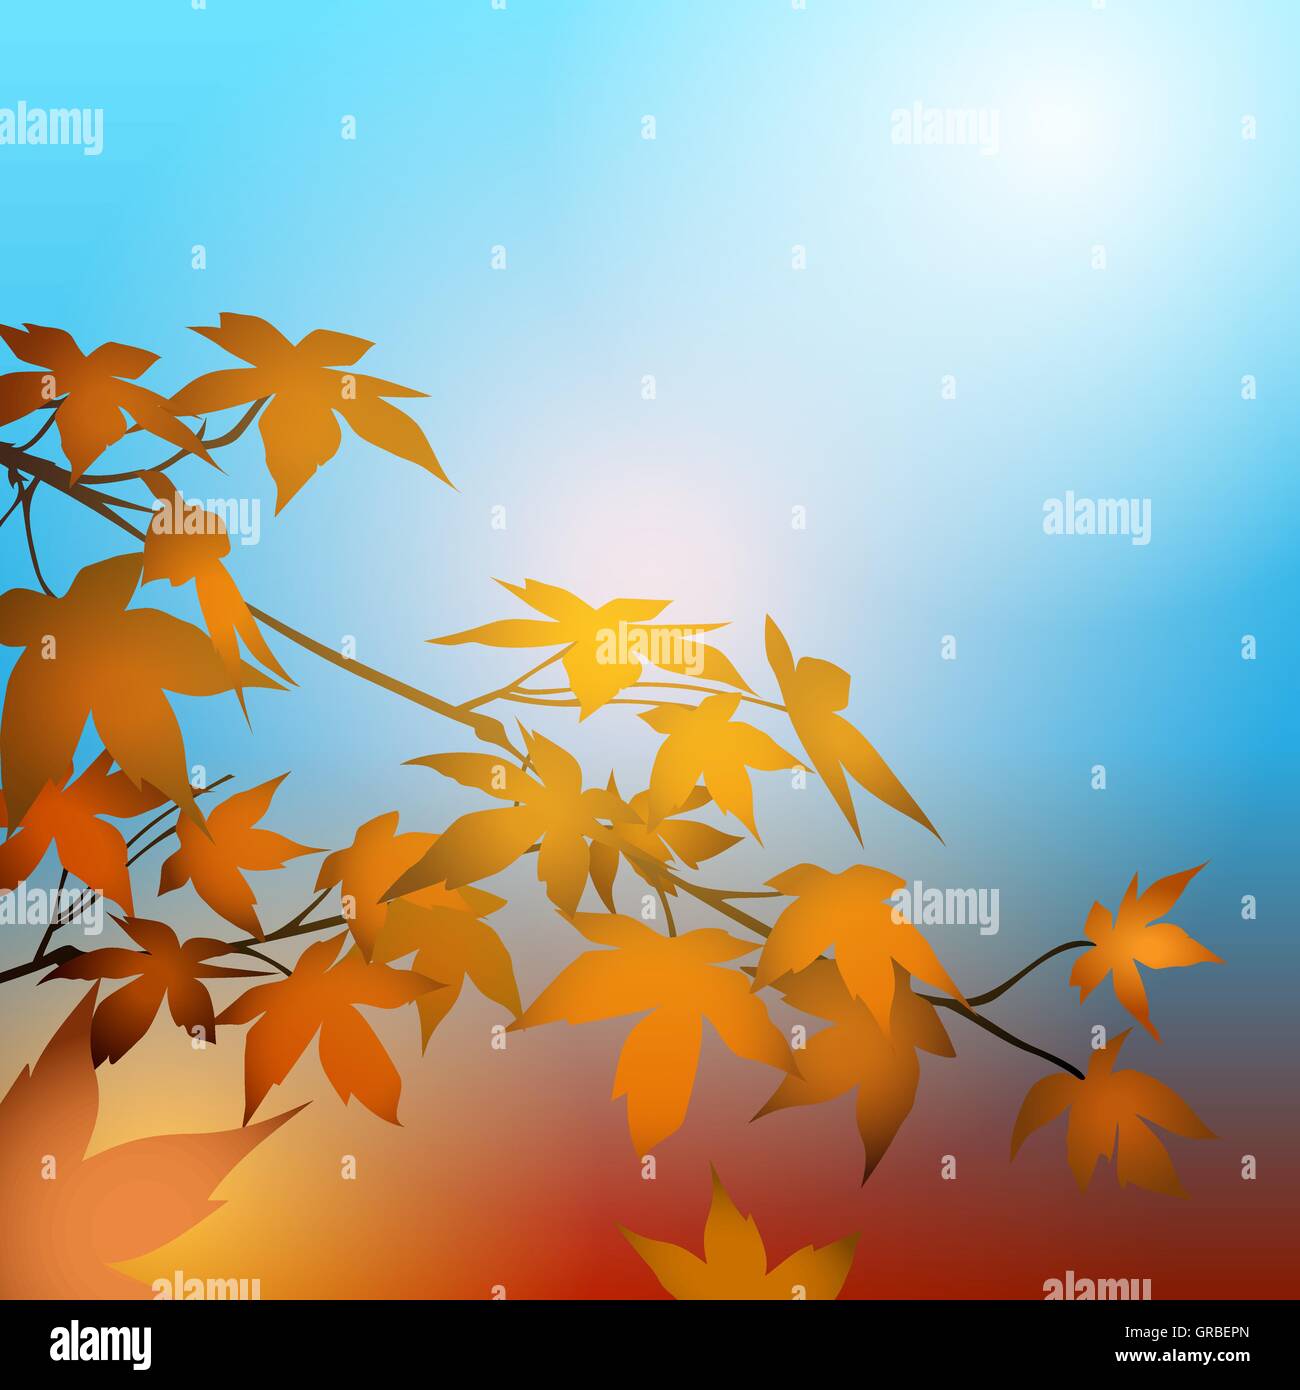 Maple leaves on the branches in the autumn forest. Autumn concept background. Stock Vector